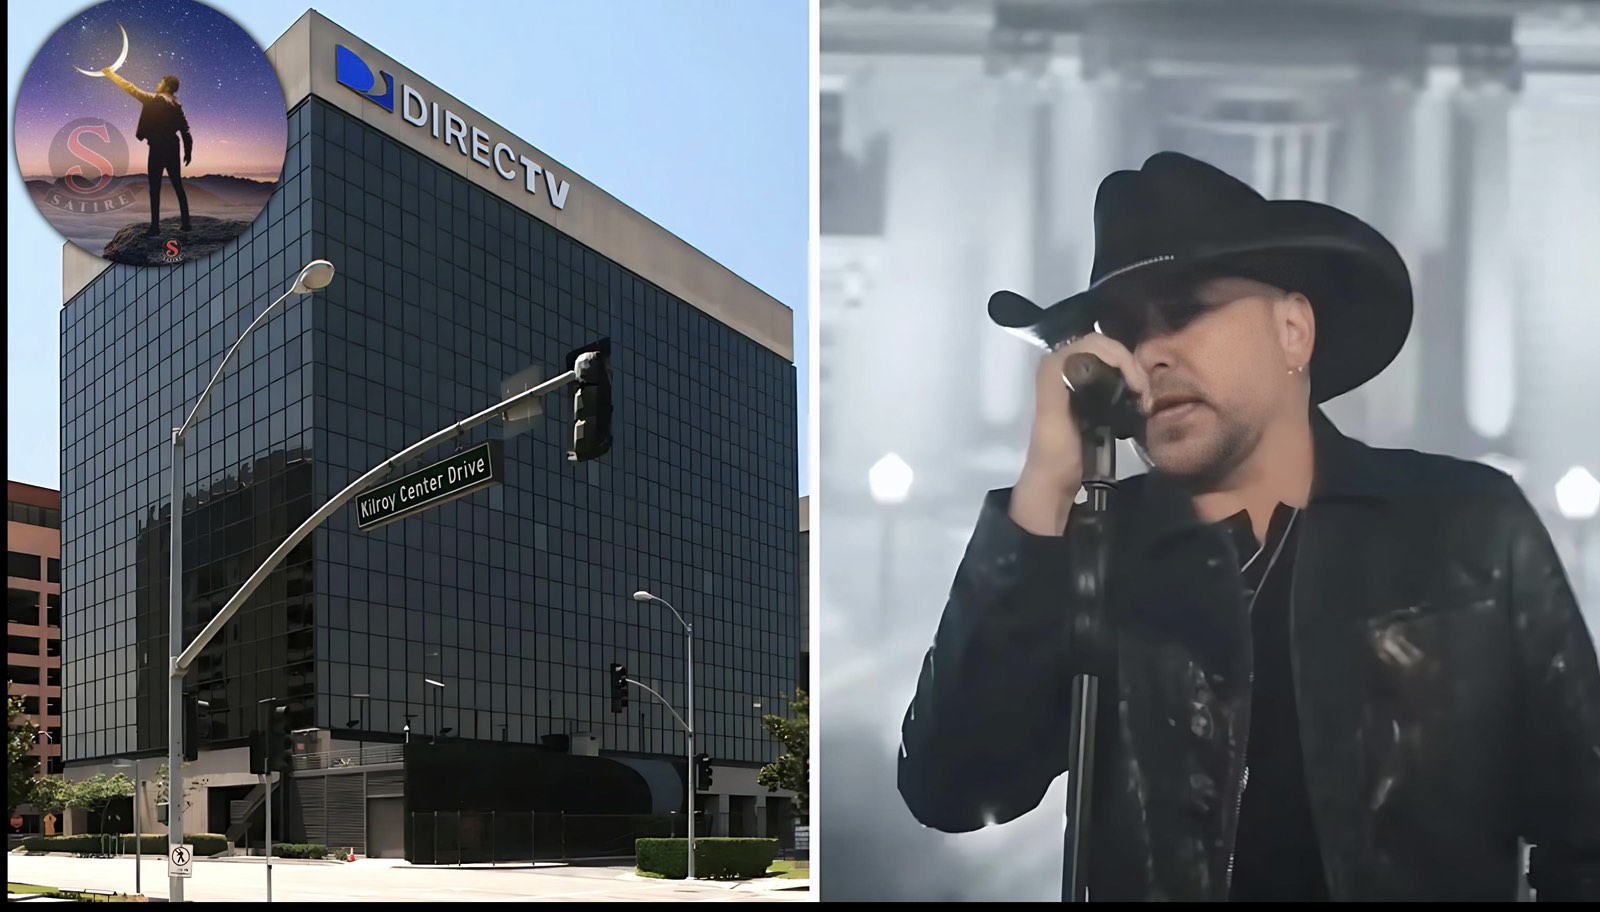 DirecTV has decided to discontinue carrying CMT due to the controversy surrounding Jason Aldean’s song “Try That In A Small Town.”